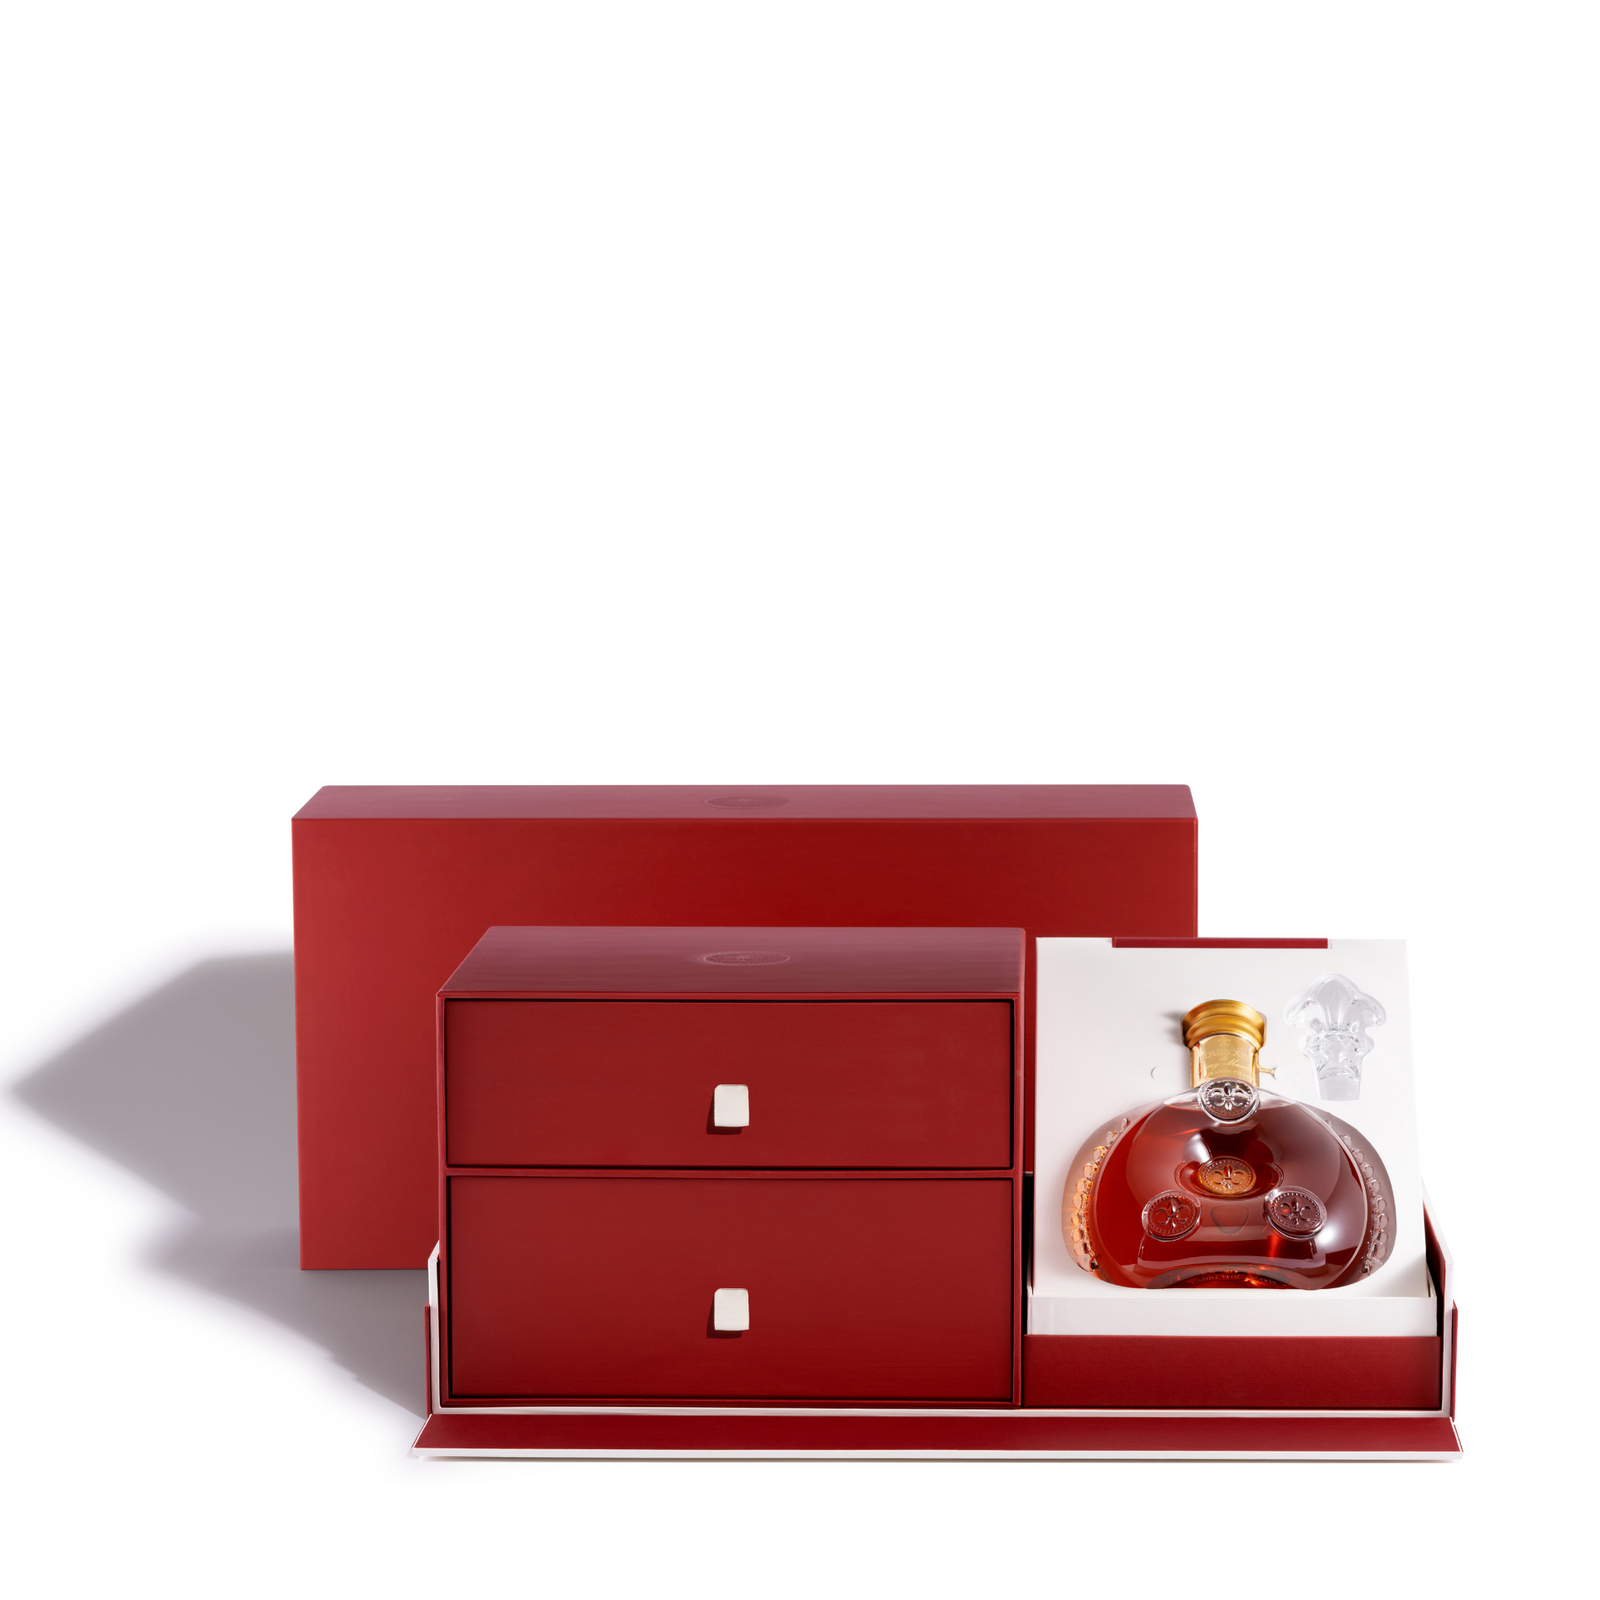 A packshot of the red packaging of the expert set with the decanter exposed